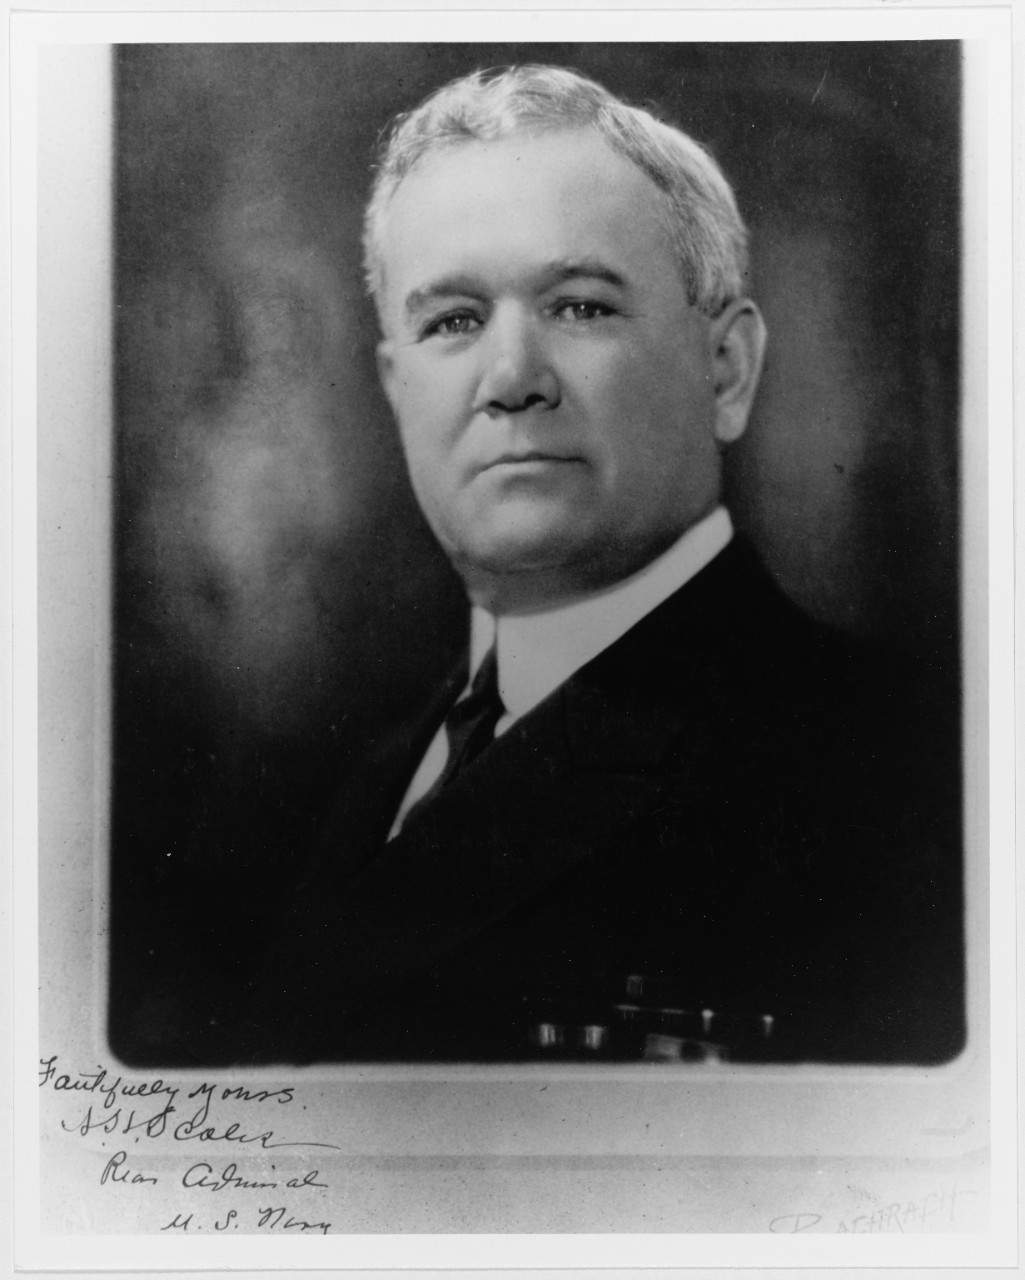 Rear Admiral Archibald H. Scales, USN